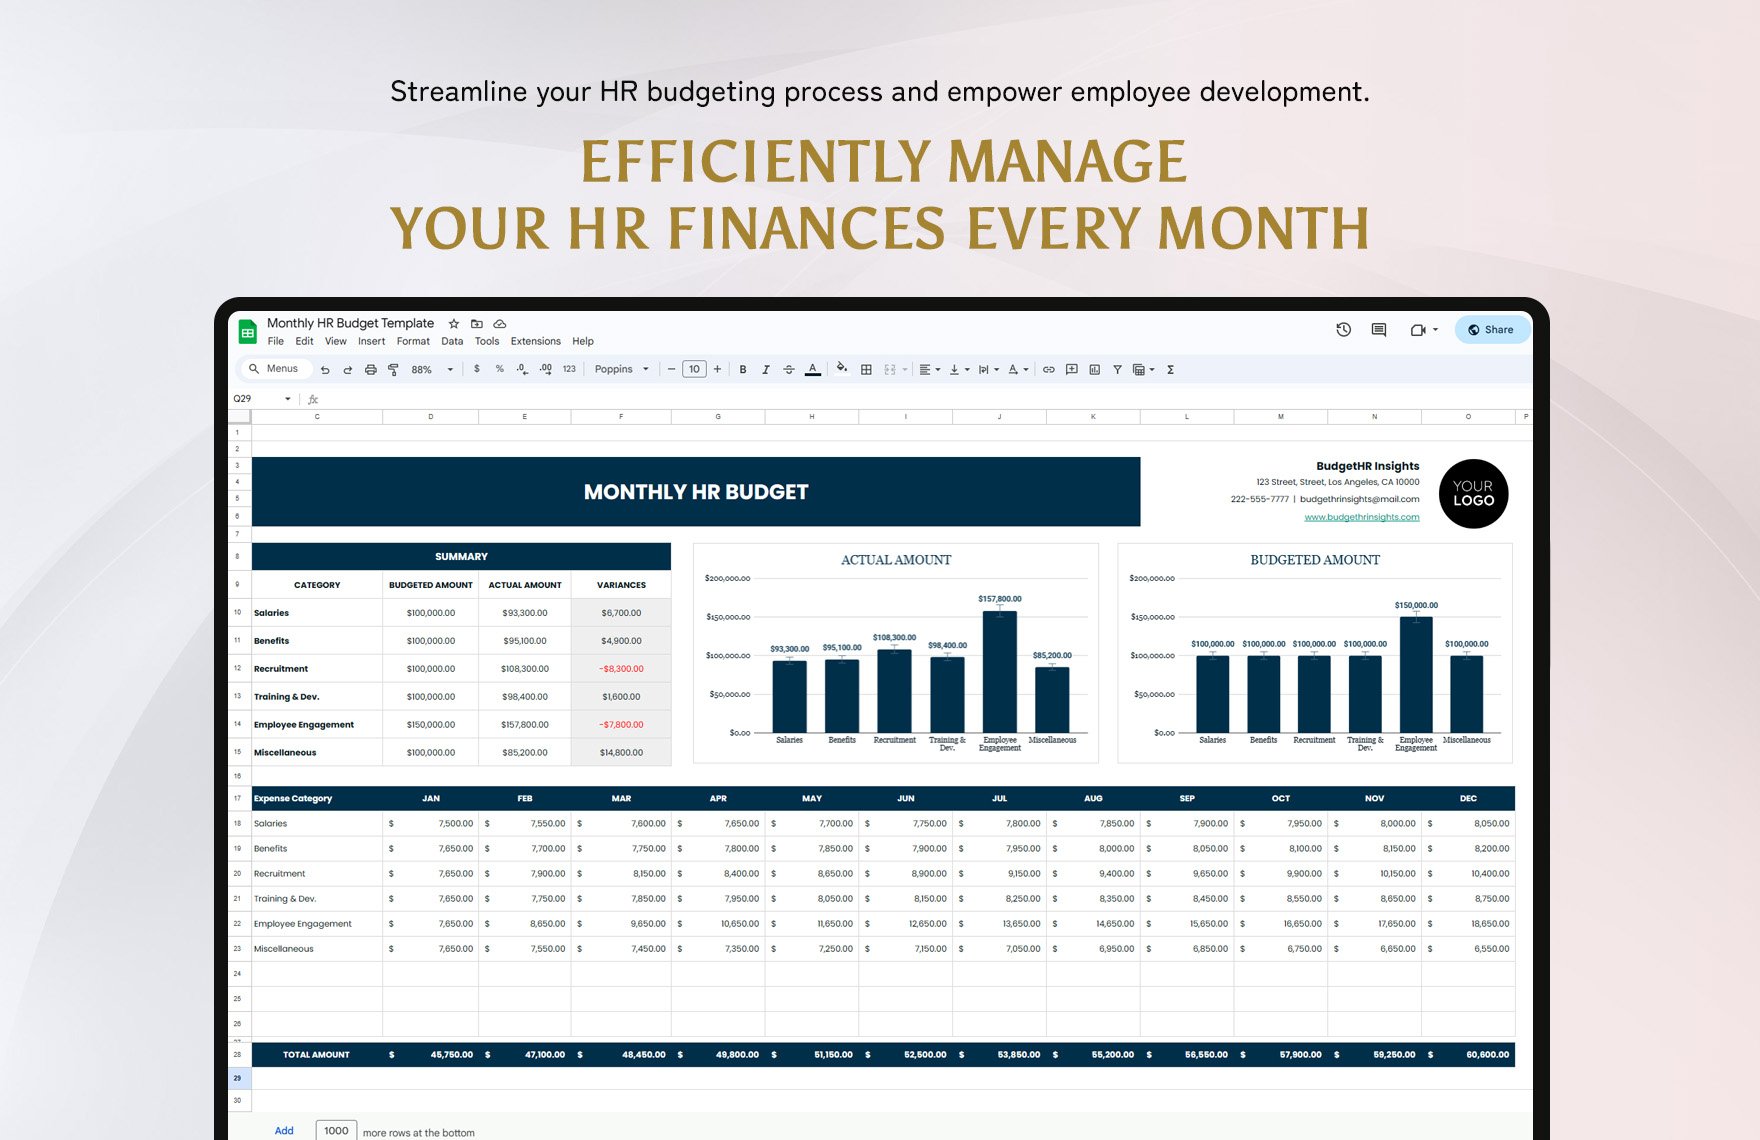 Monthly HR Budget Template